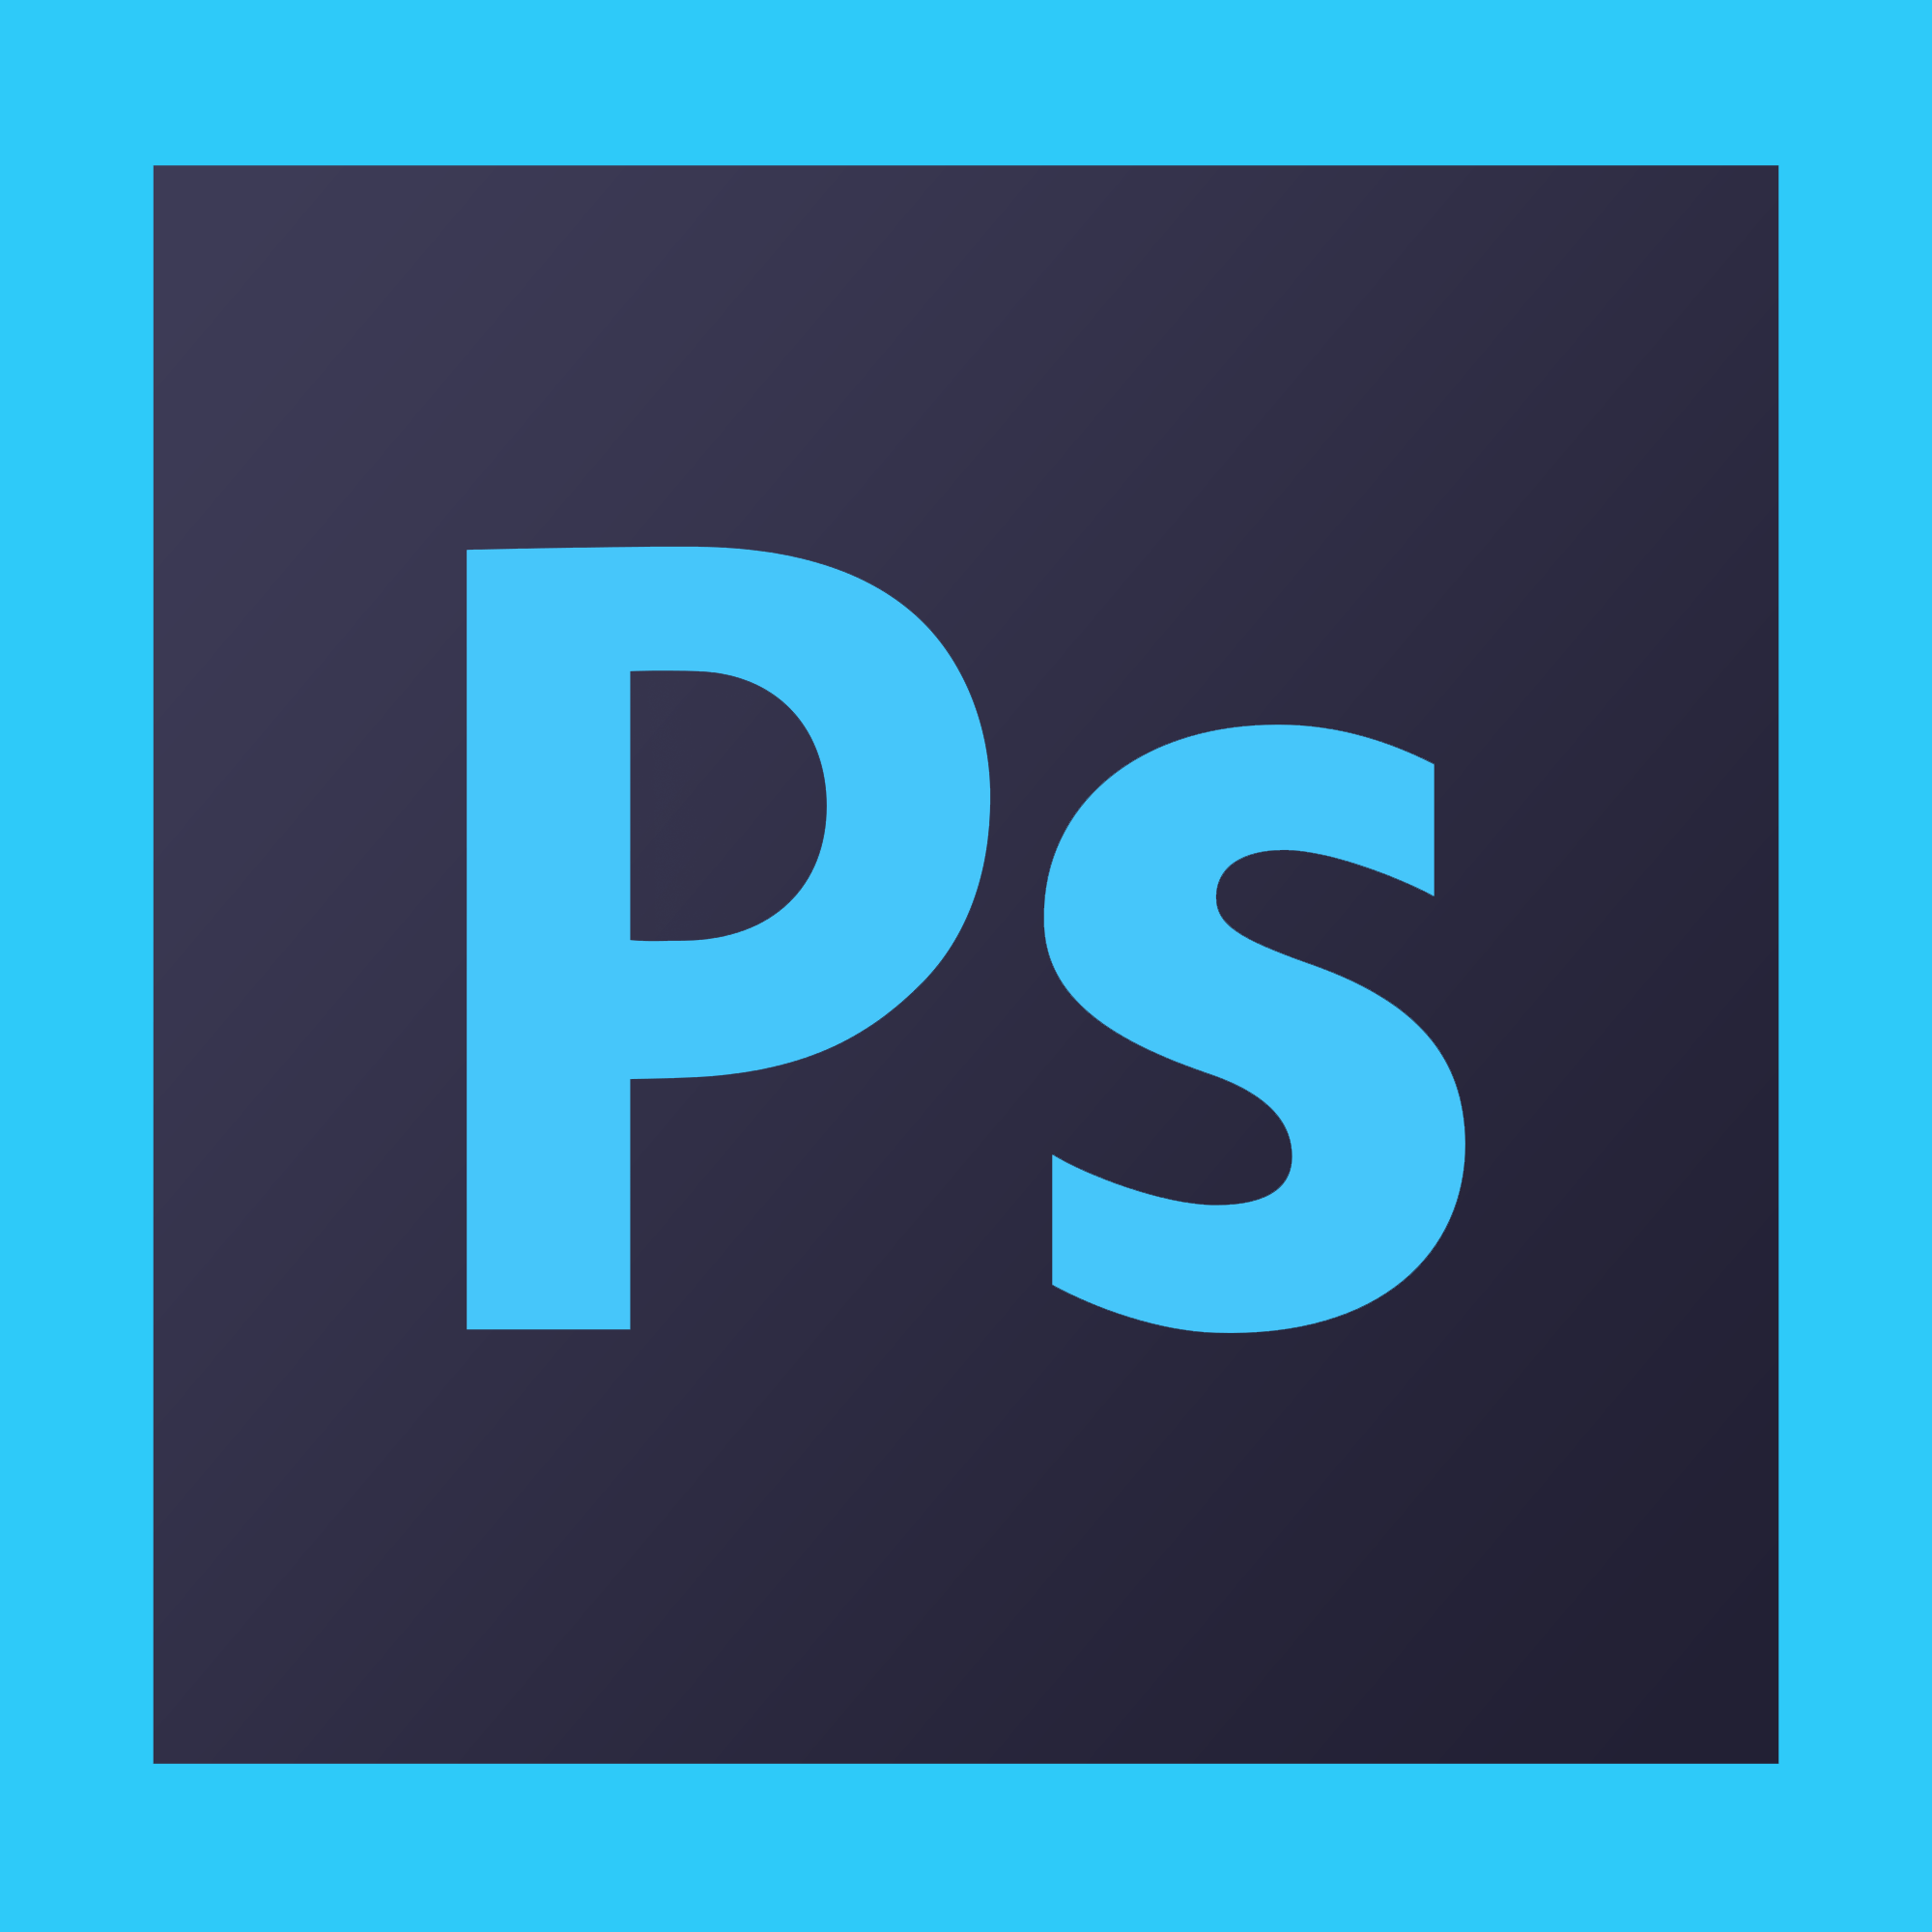 clipart in photoshop cc - photo #11